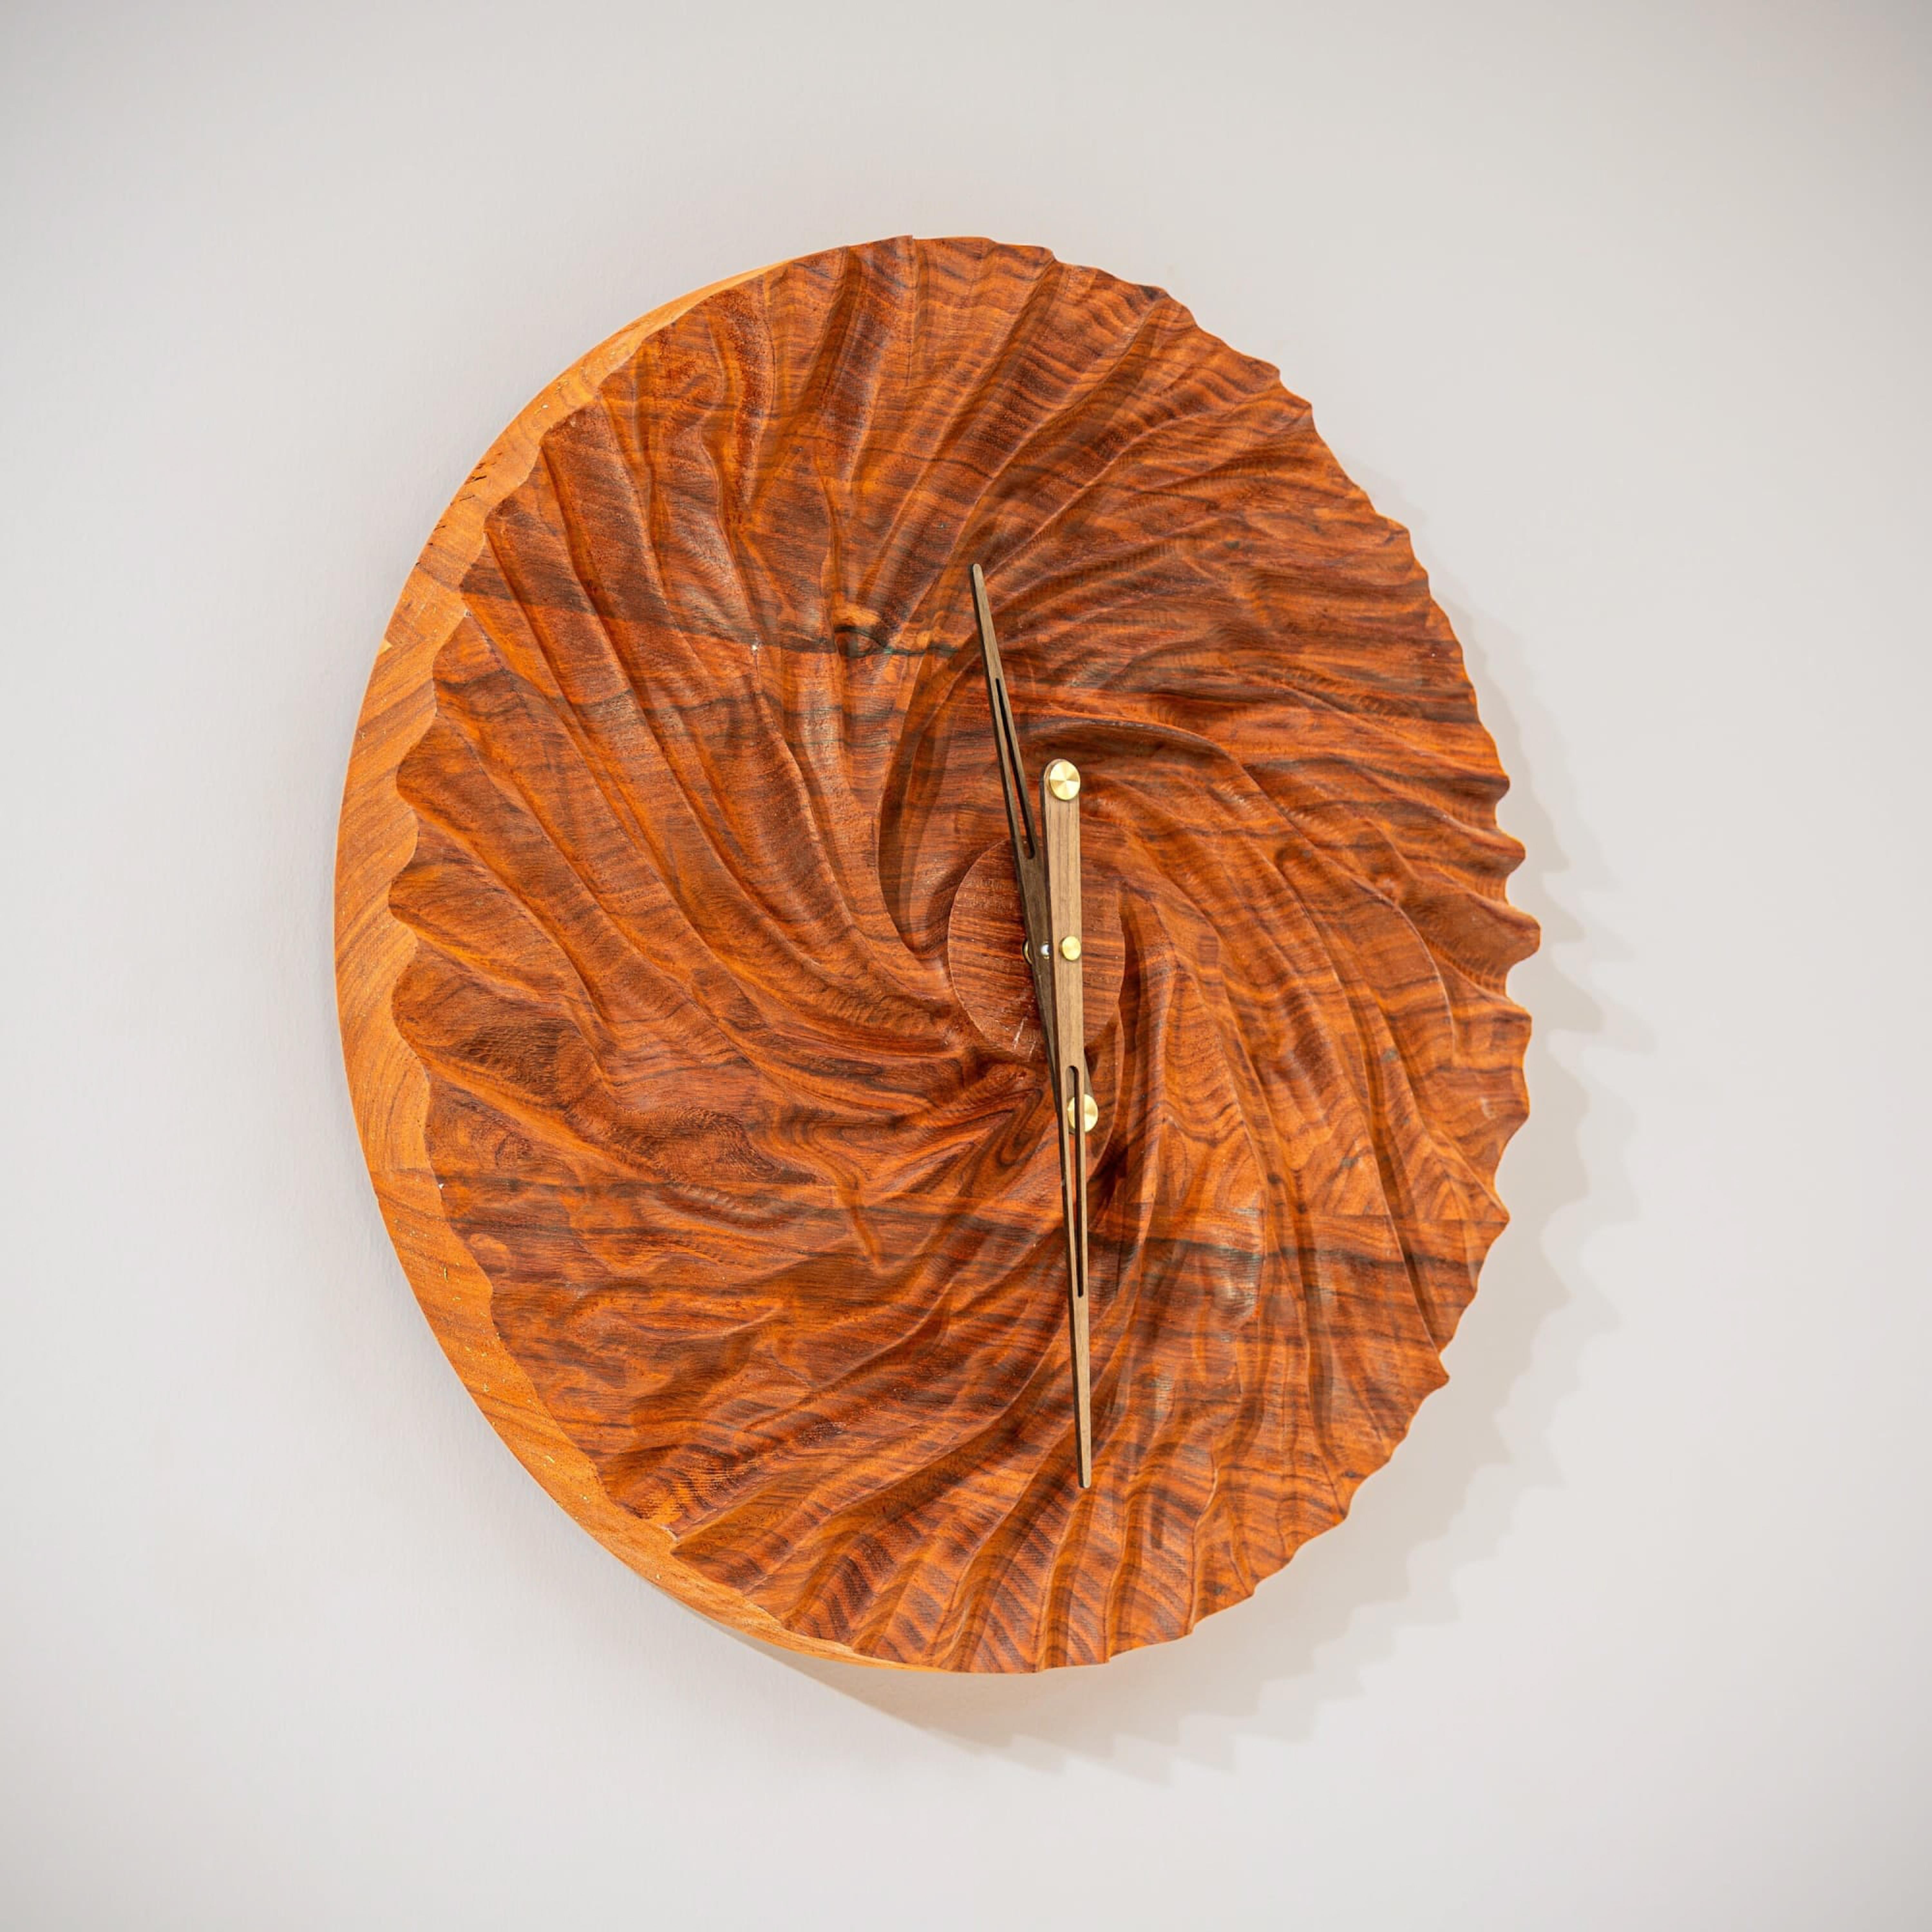 Tulip Design Wooden Wall Clock In Distressed Condition For Sale In İnegöl, TR